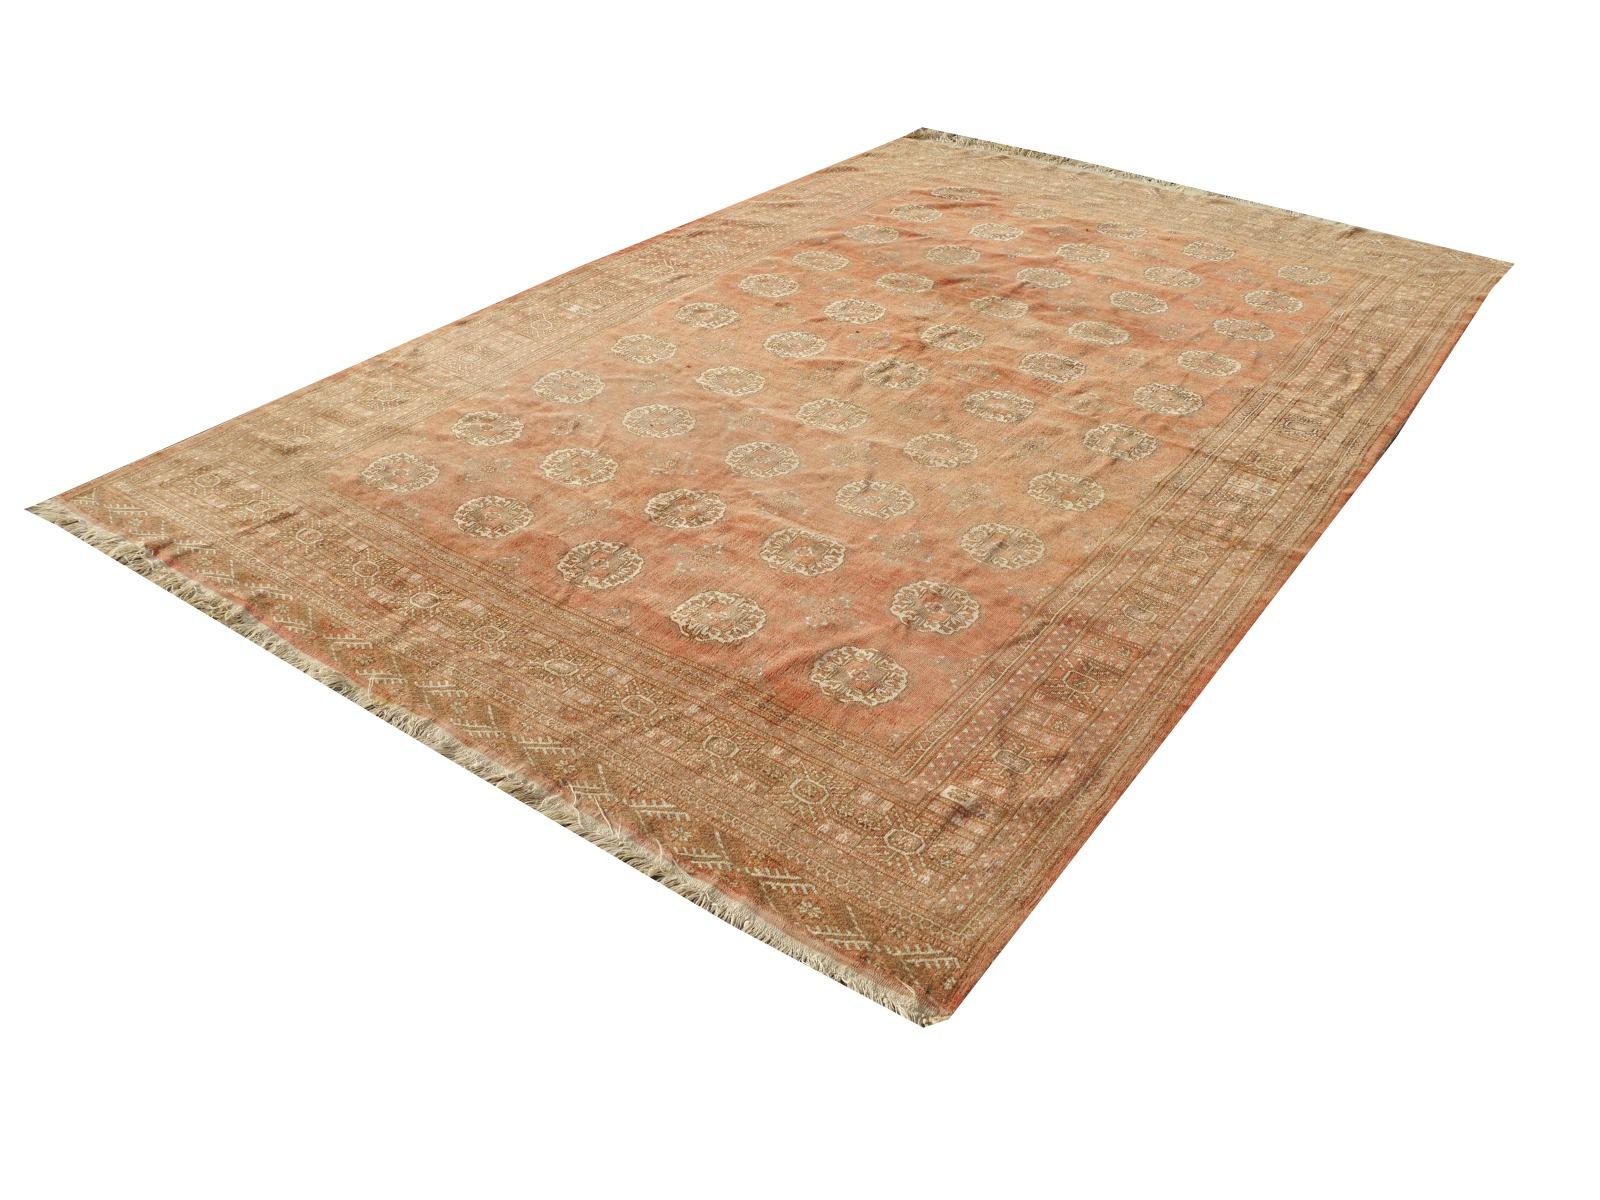 Ersari Rug Tribal Turkoman Hand Knotted Semi Antique Carpet Muted Faded Low Pile For Sale 3